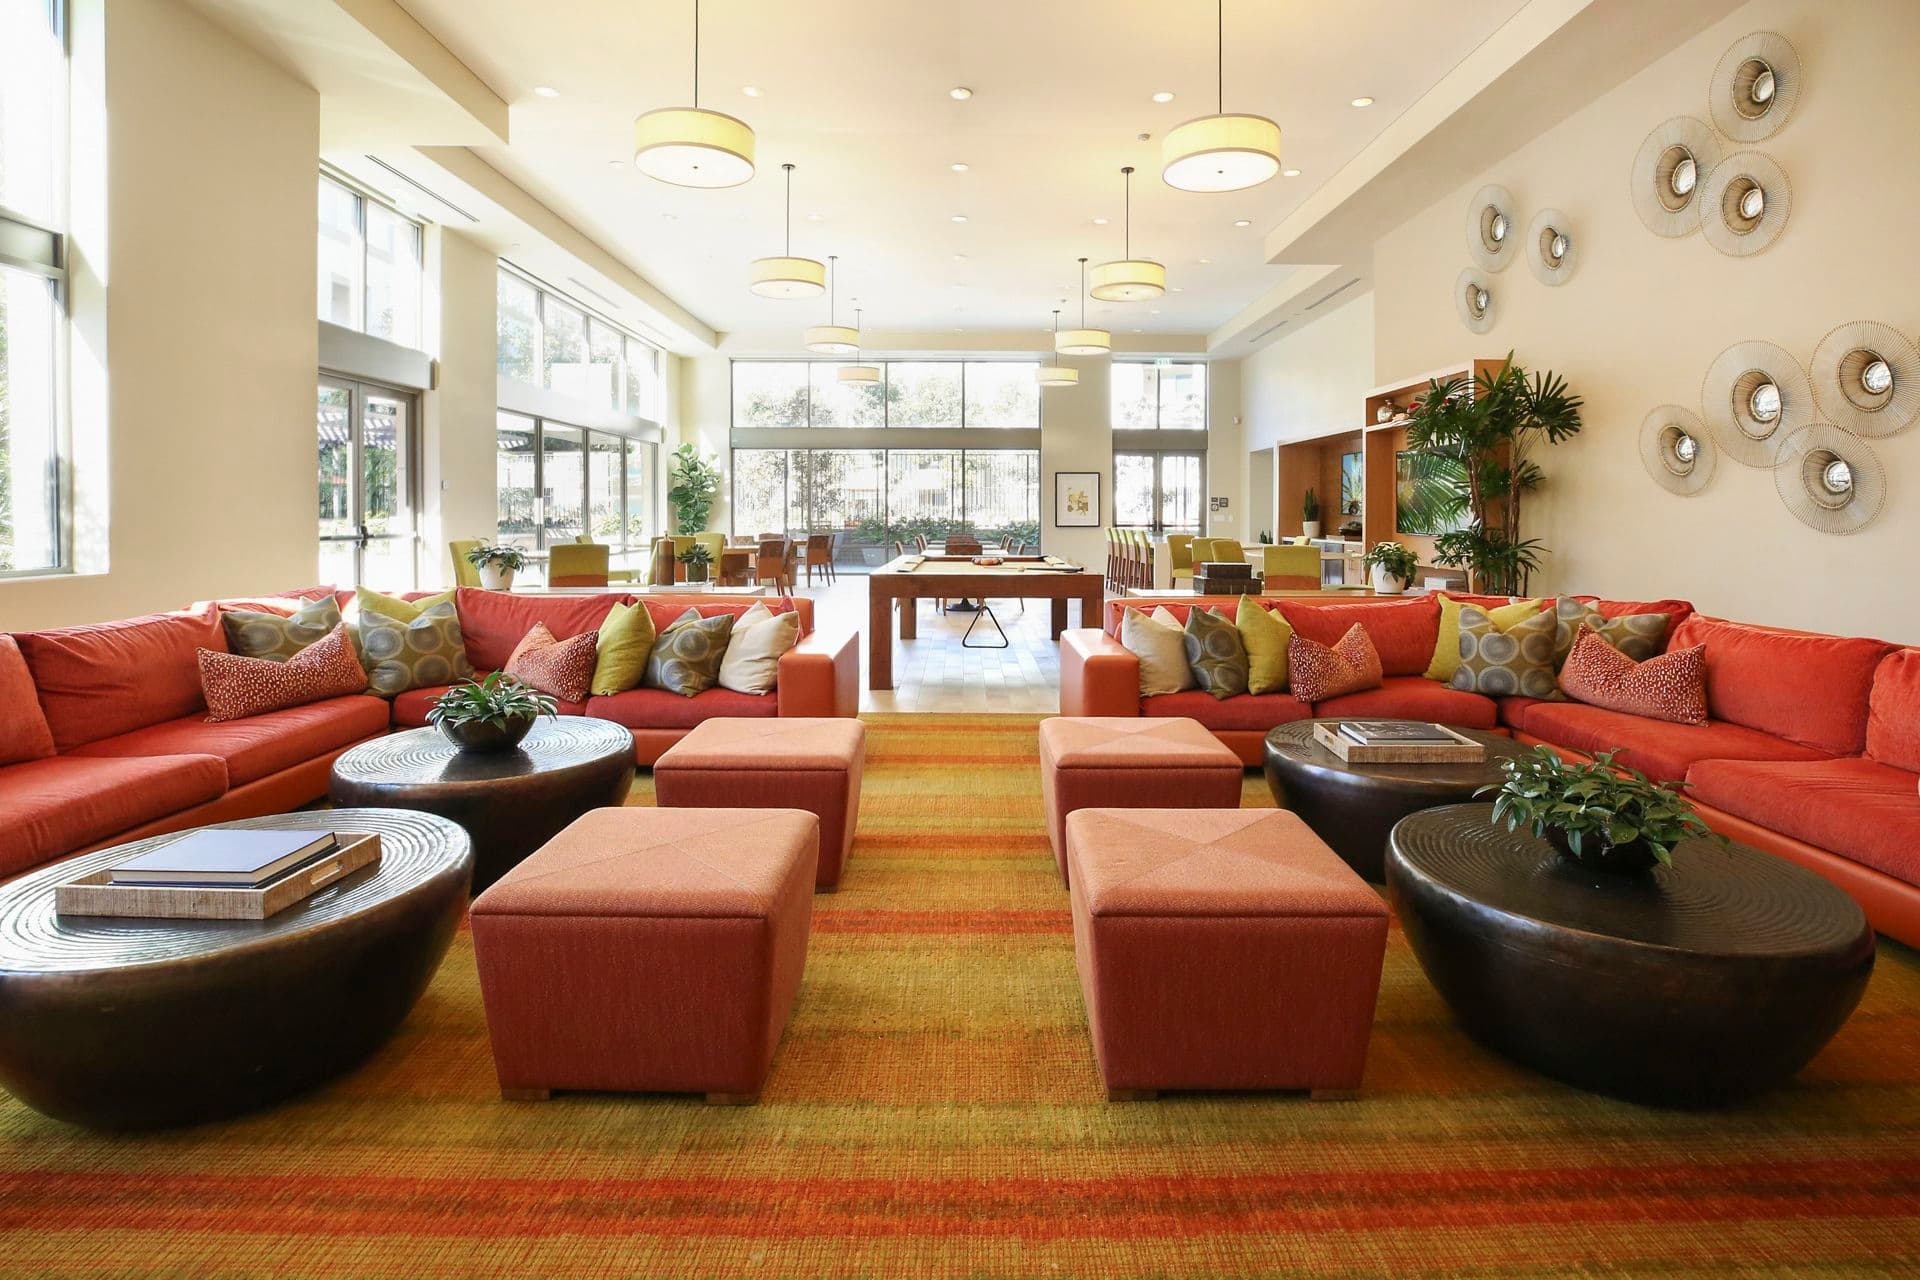 Interior view of Clubhouse at Park Place Apartment Homes in Irvine, CA.